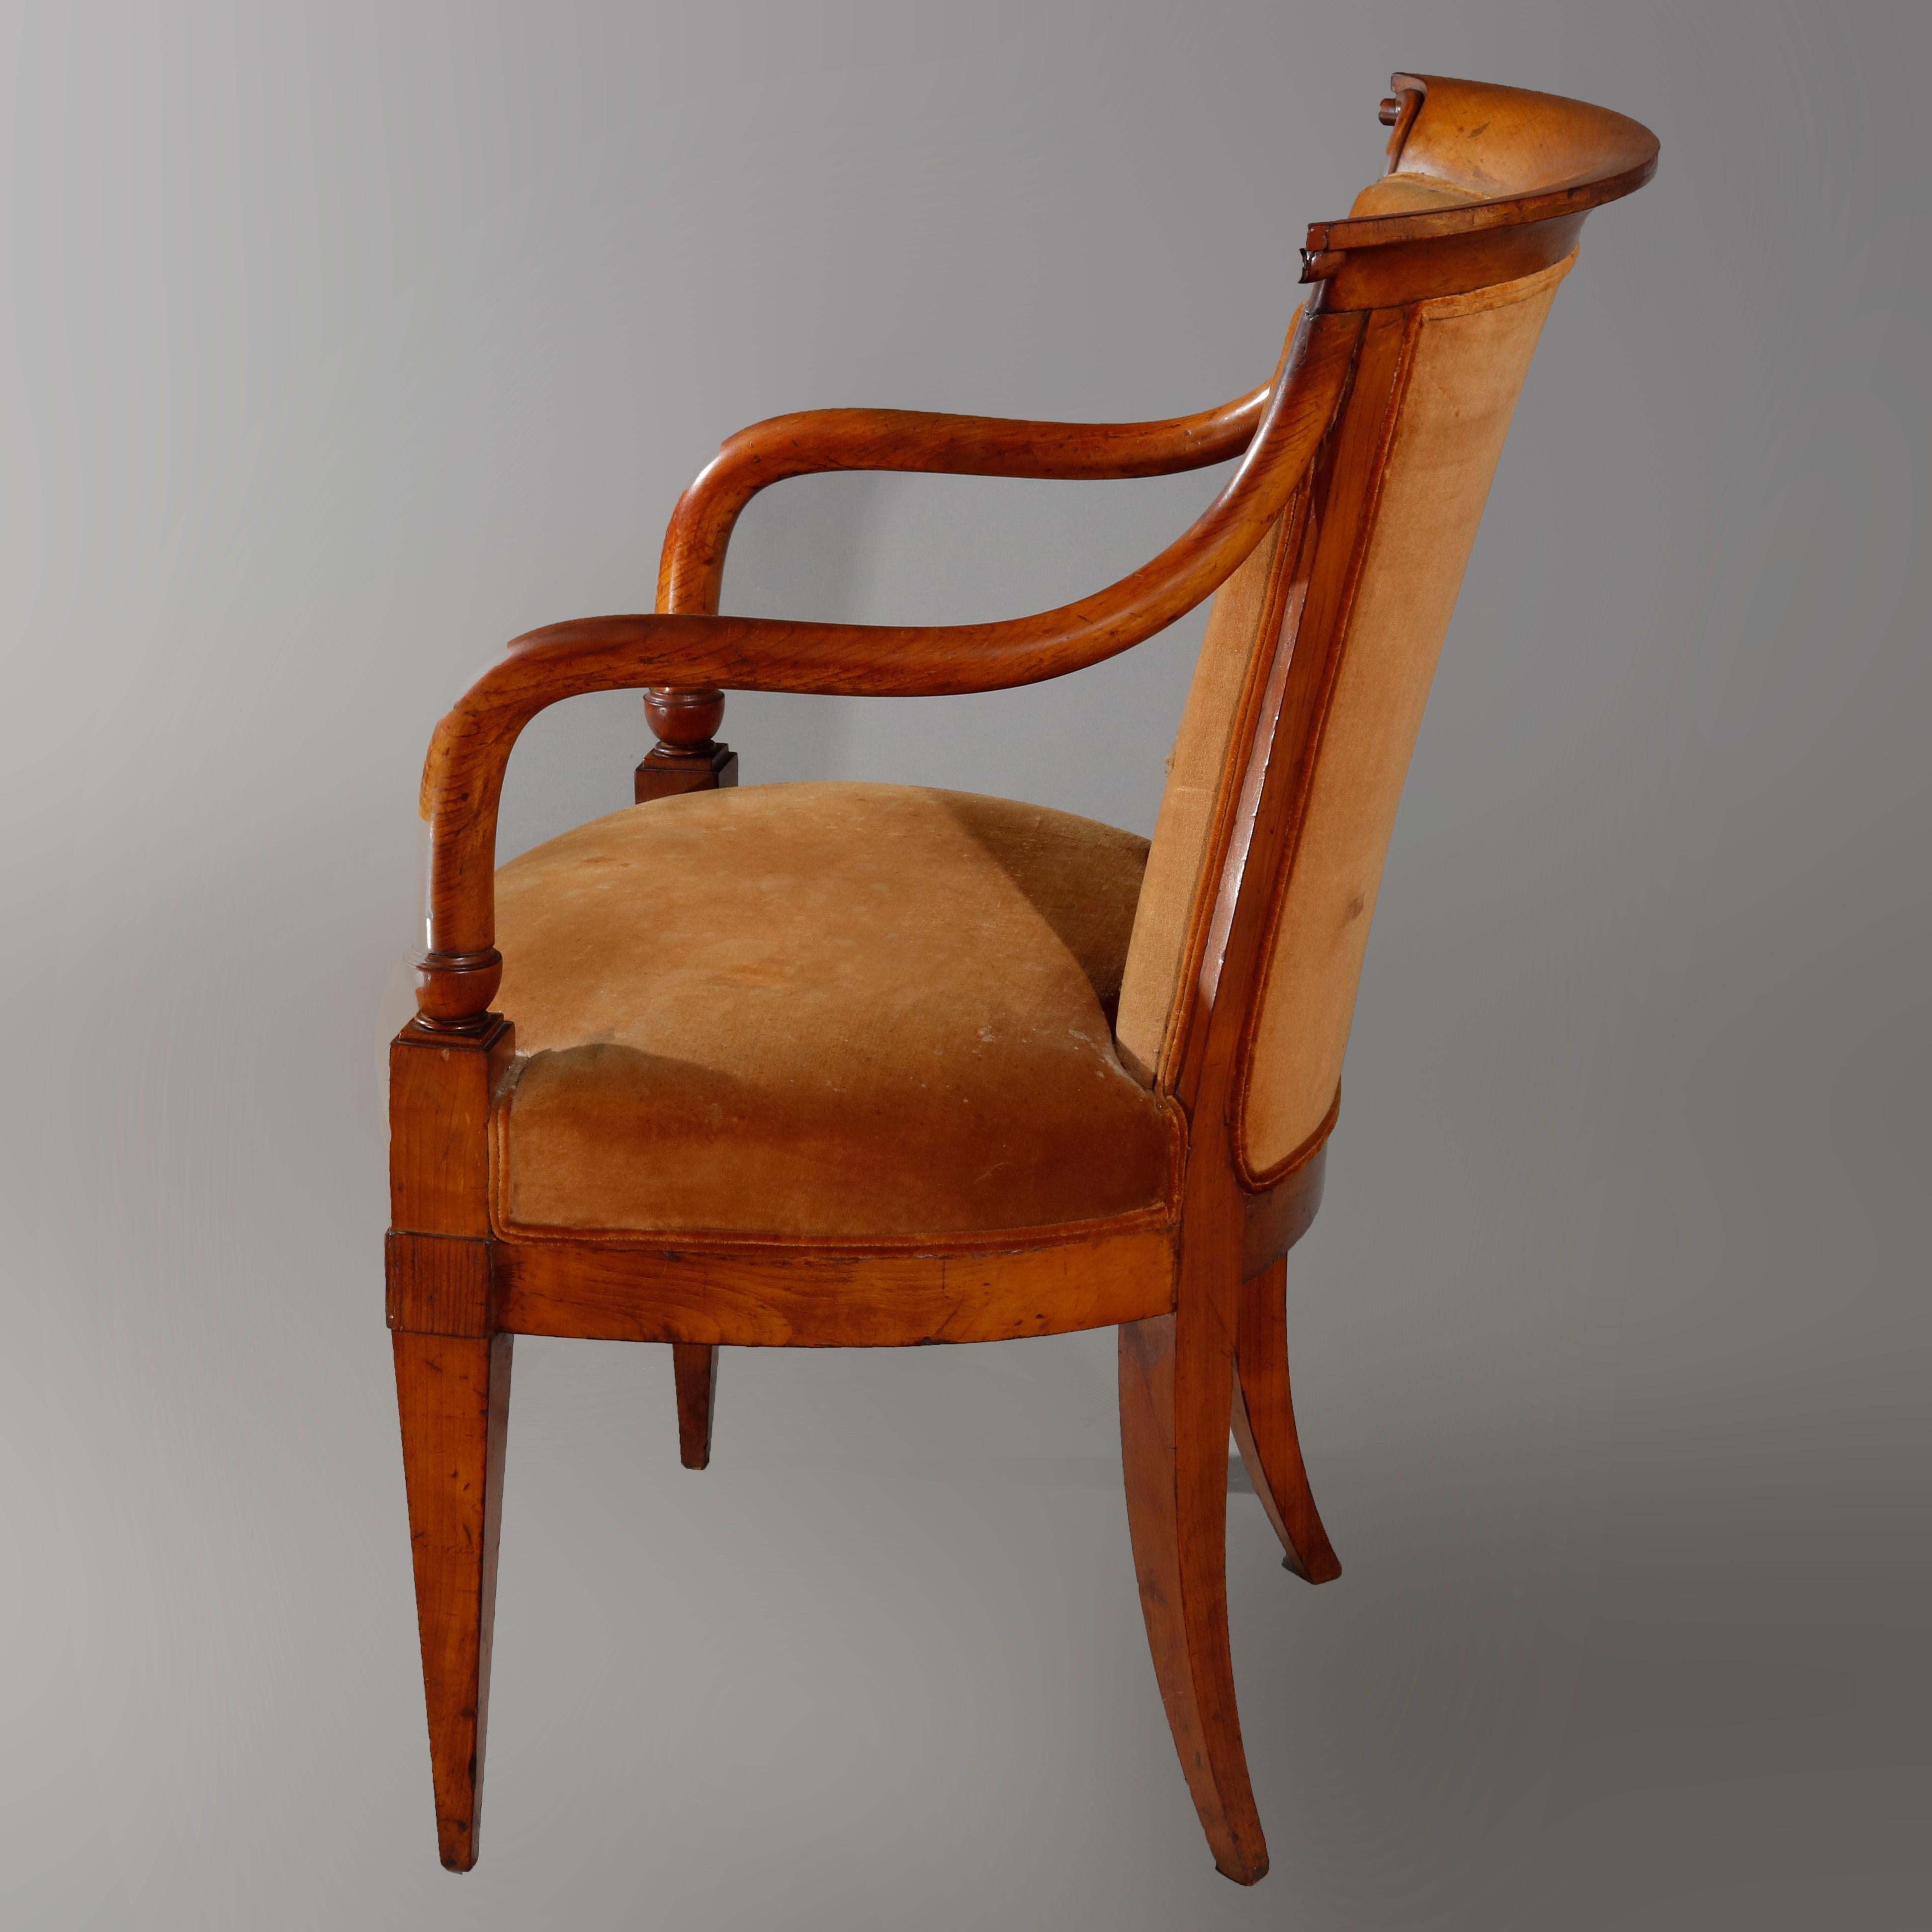 An antique European Biedermeier armchair offers walnut frame with scroll form crest surmounting upholstered back and seat, raised on square and tapered legs, circa 1820

Measures: 35.25